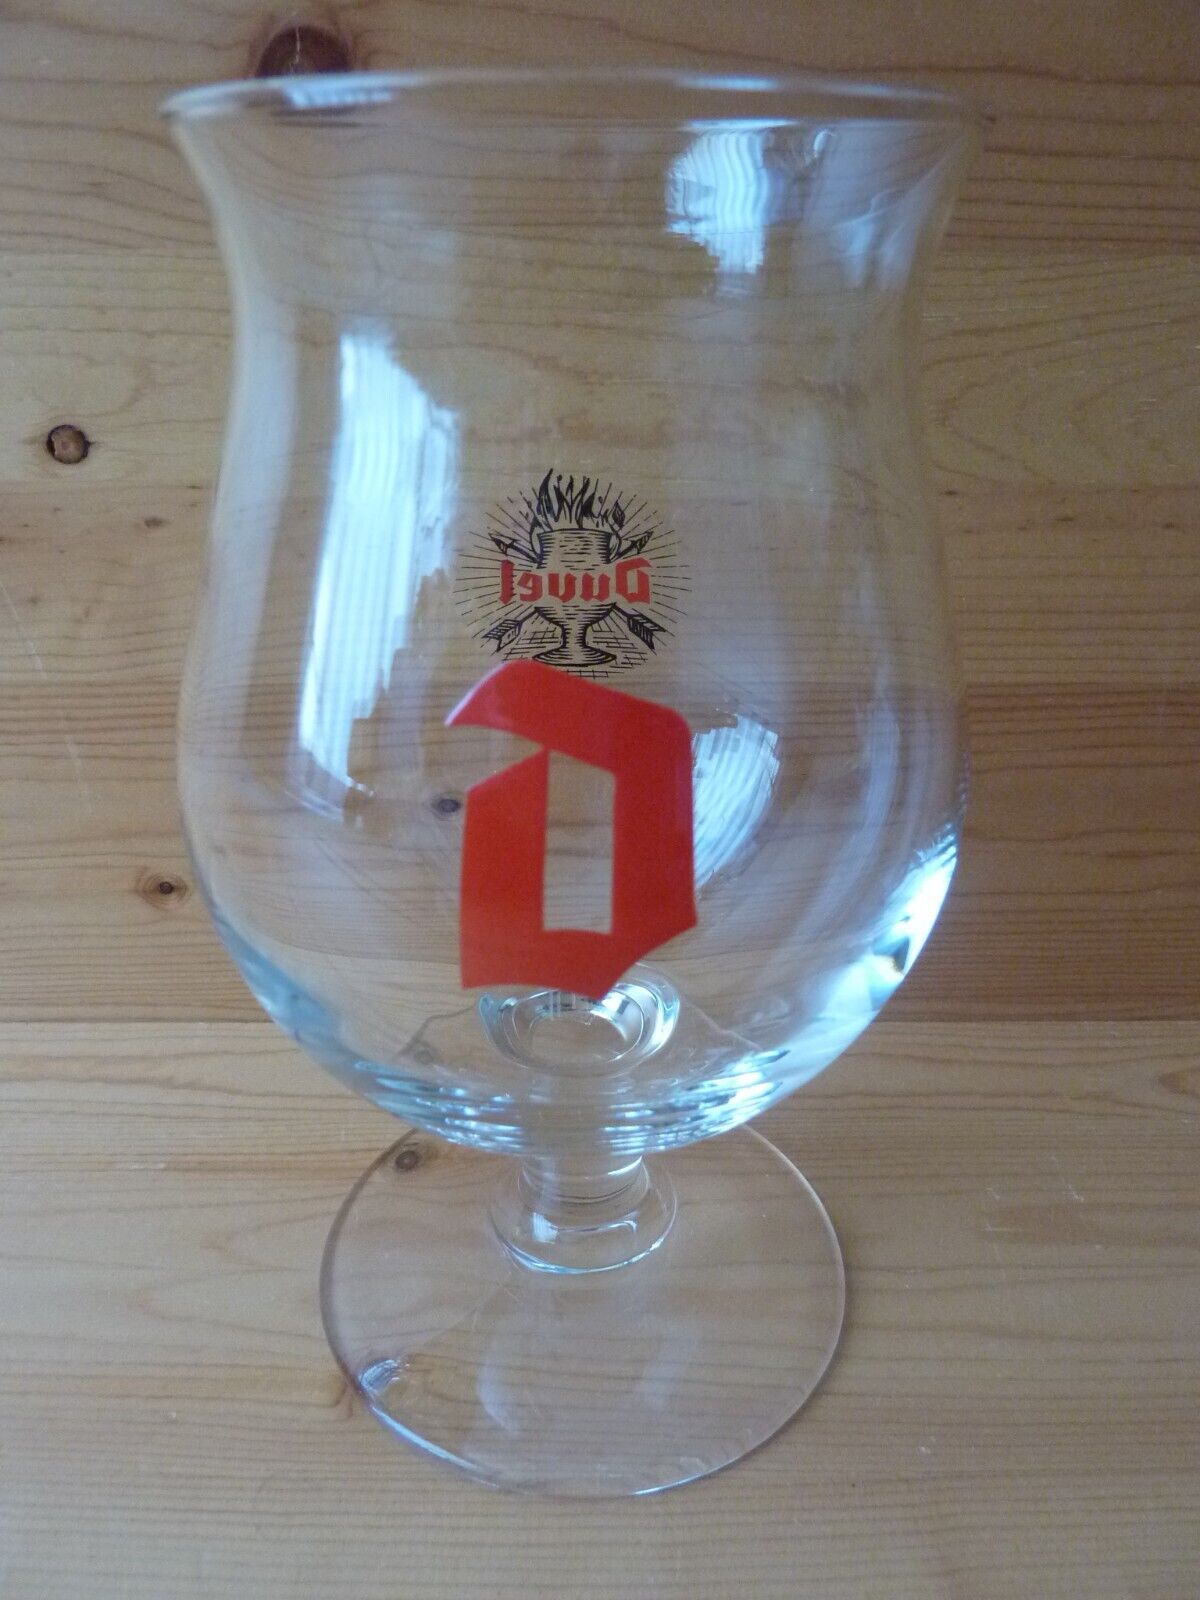 DUVAL RED D Belgian Beer glass Tulip stemmed chalice 33cl 300ml size